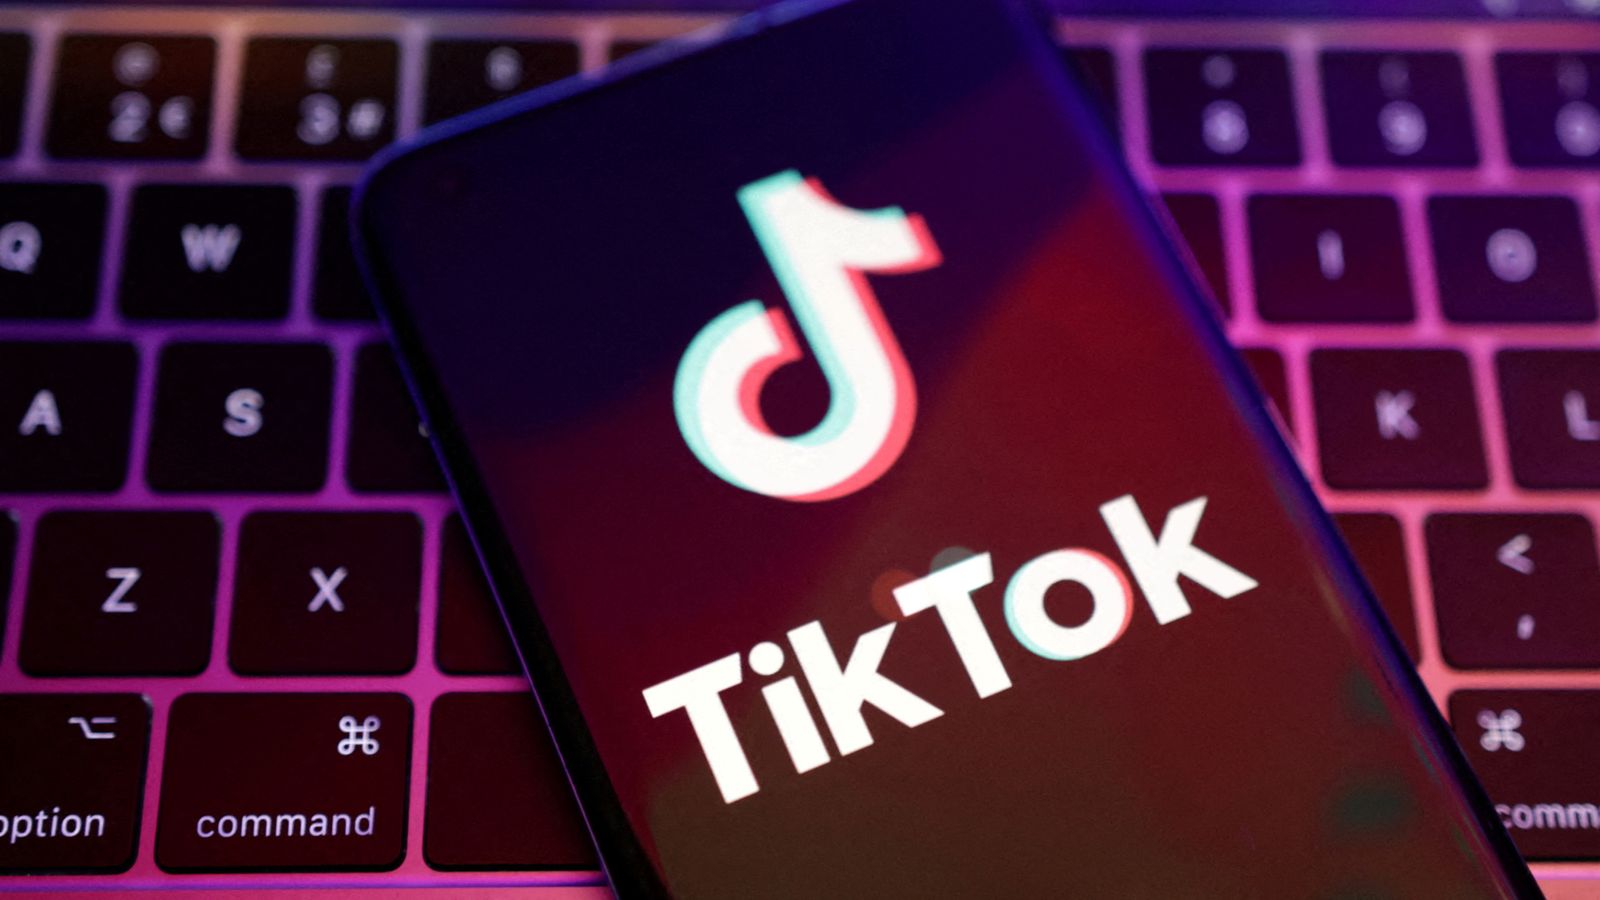 TikTok to be blocked from parliamentary devices and network over cyber security fears